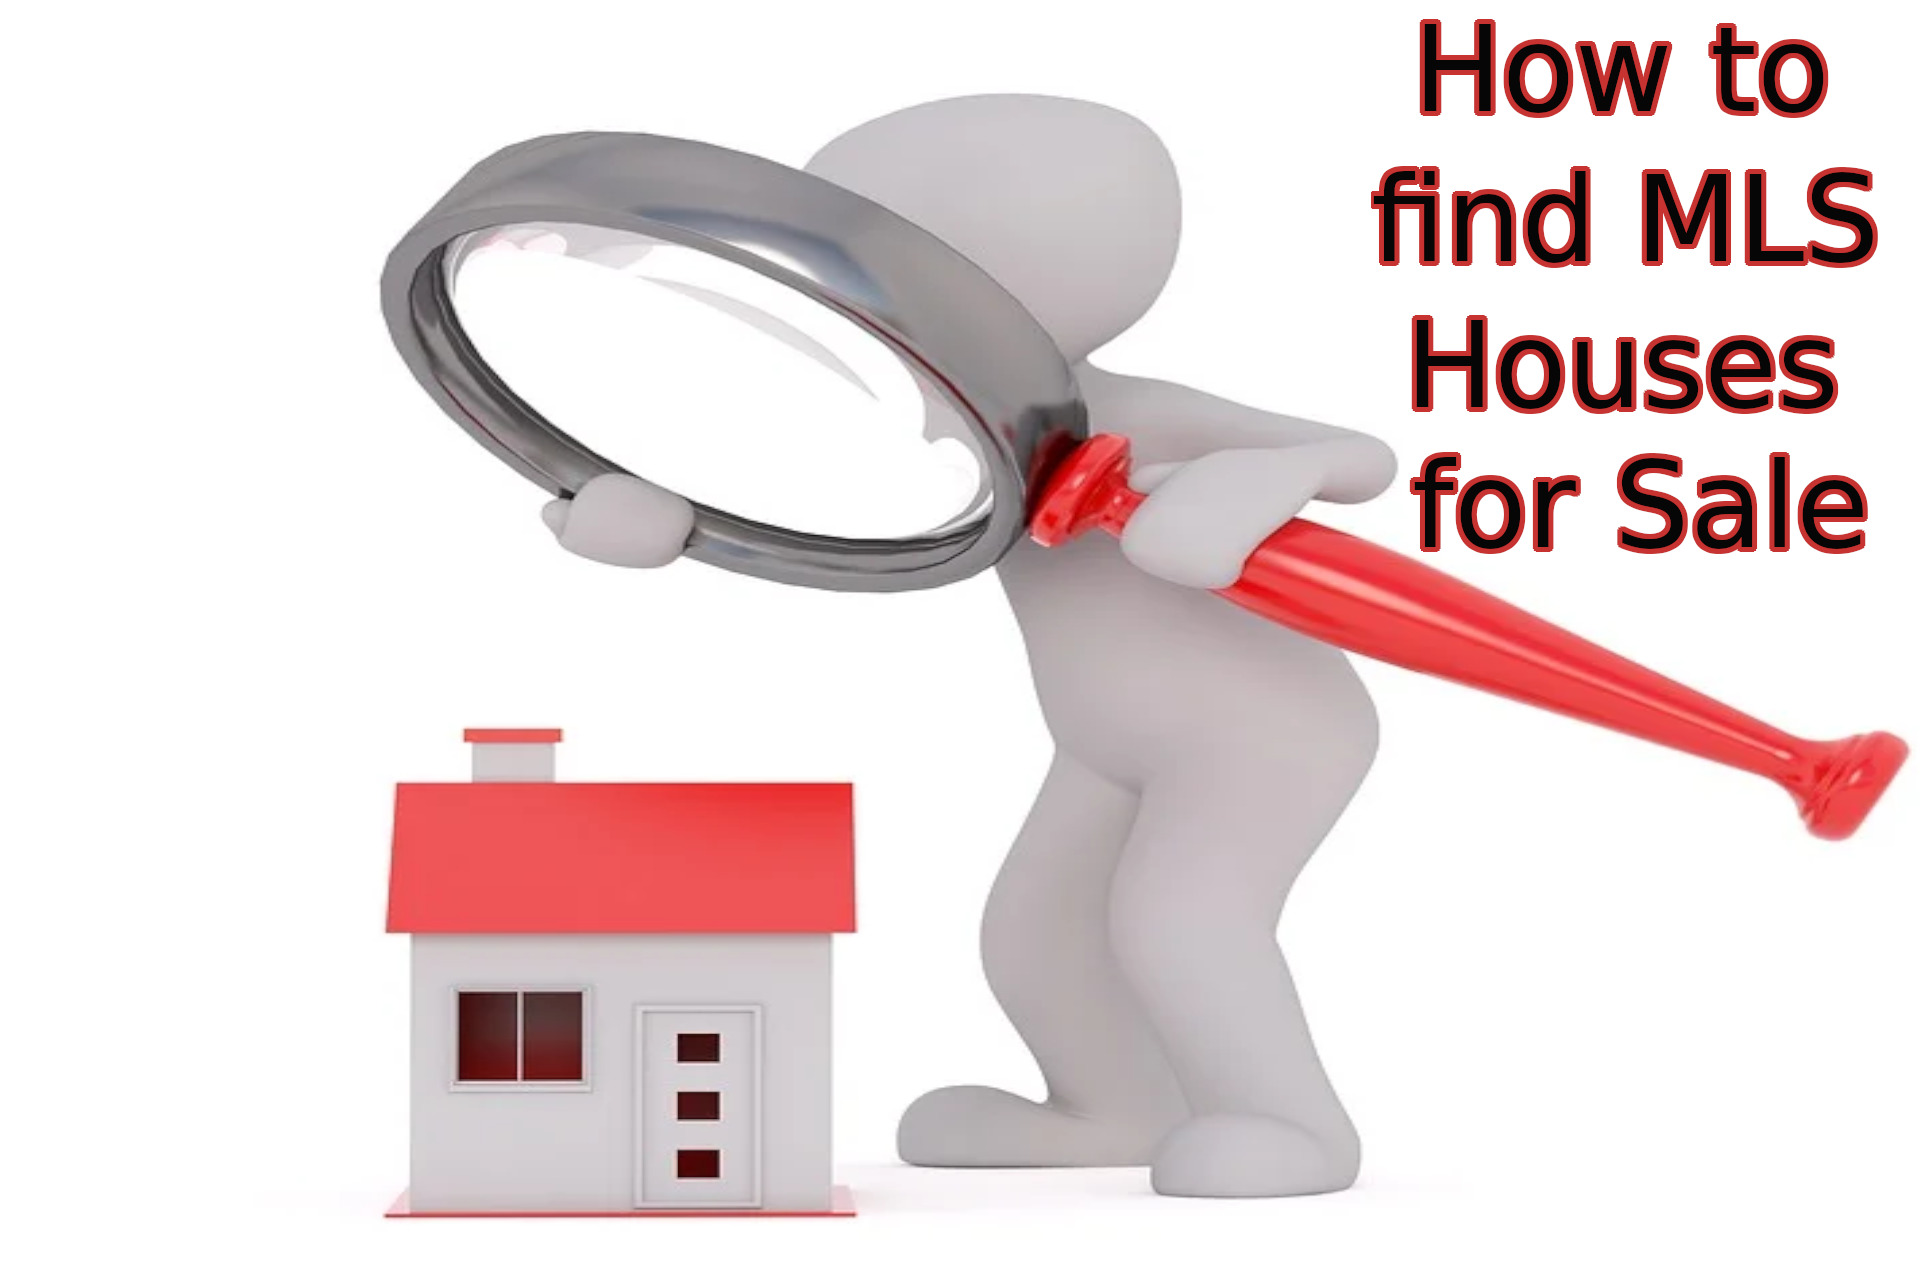 How to find MLS Houses for Sale